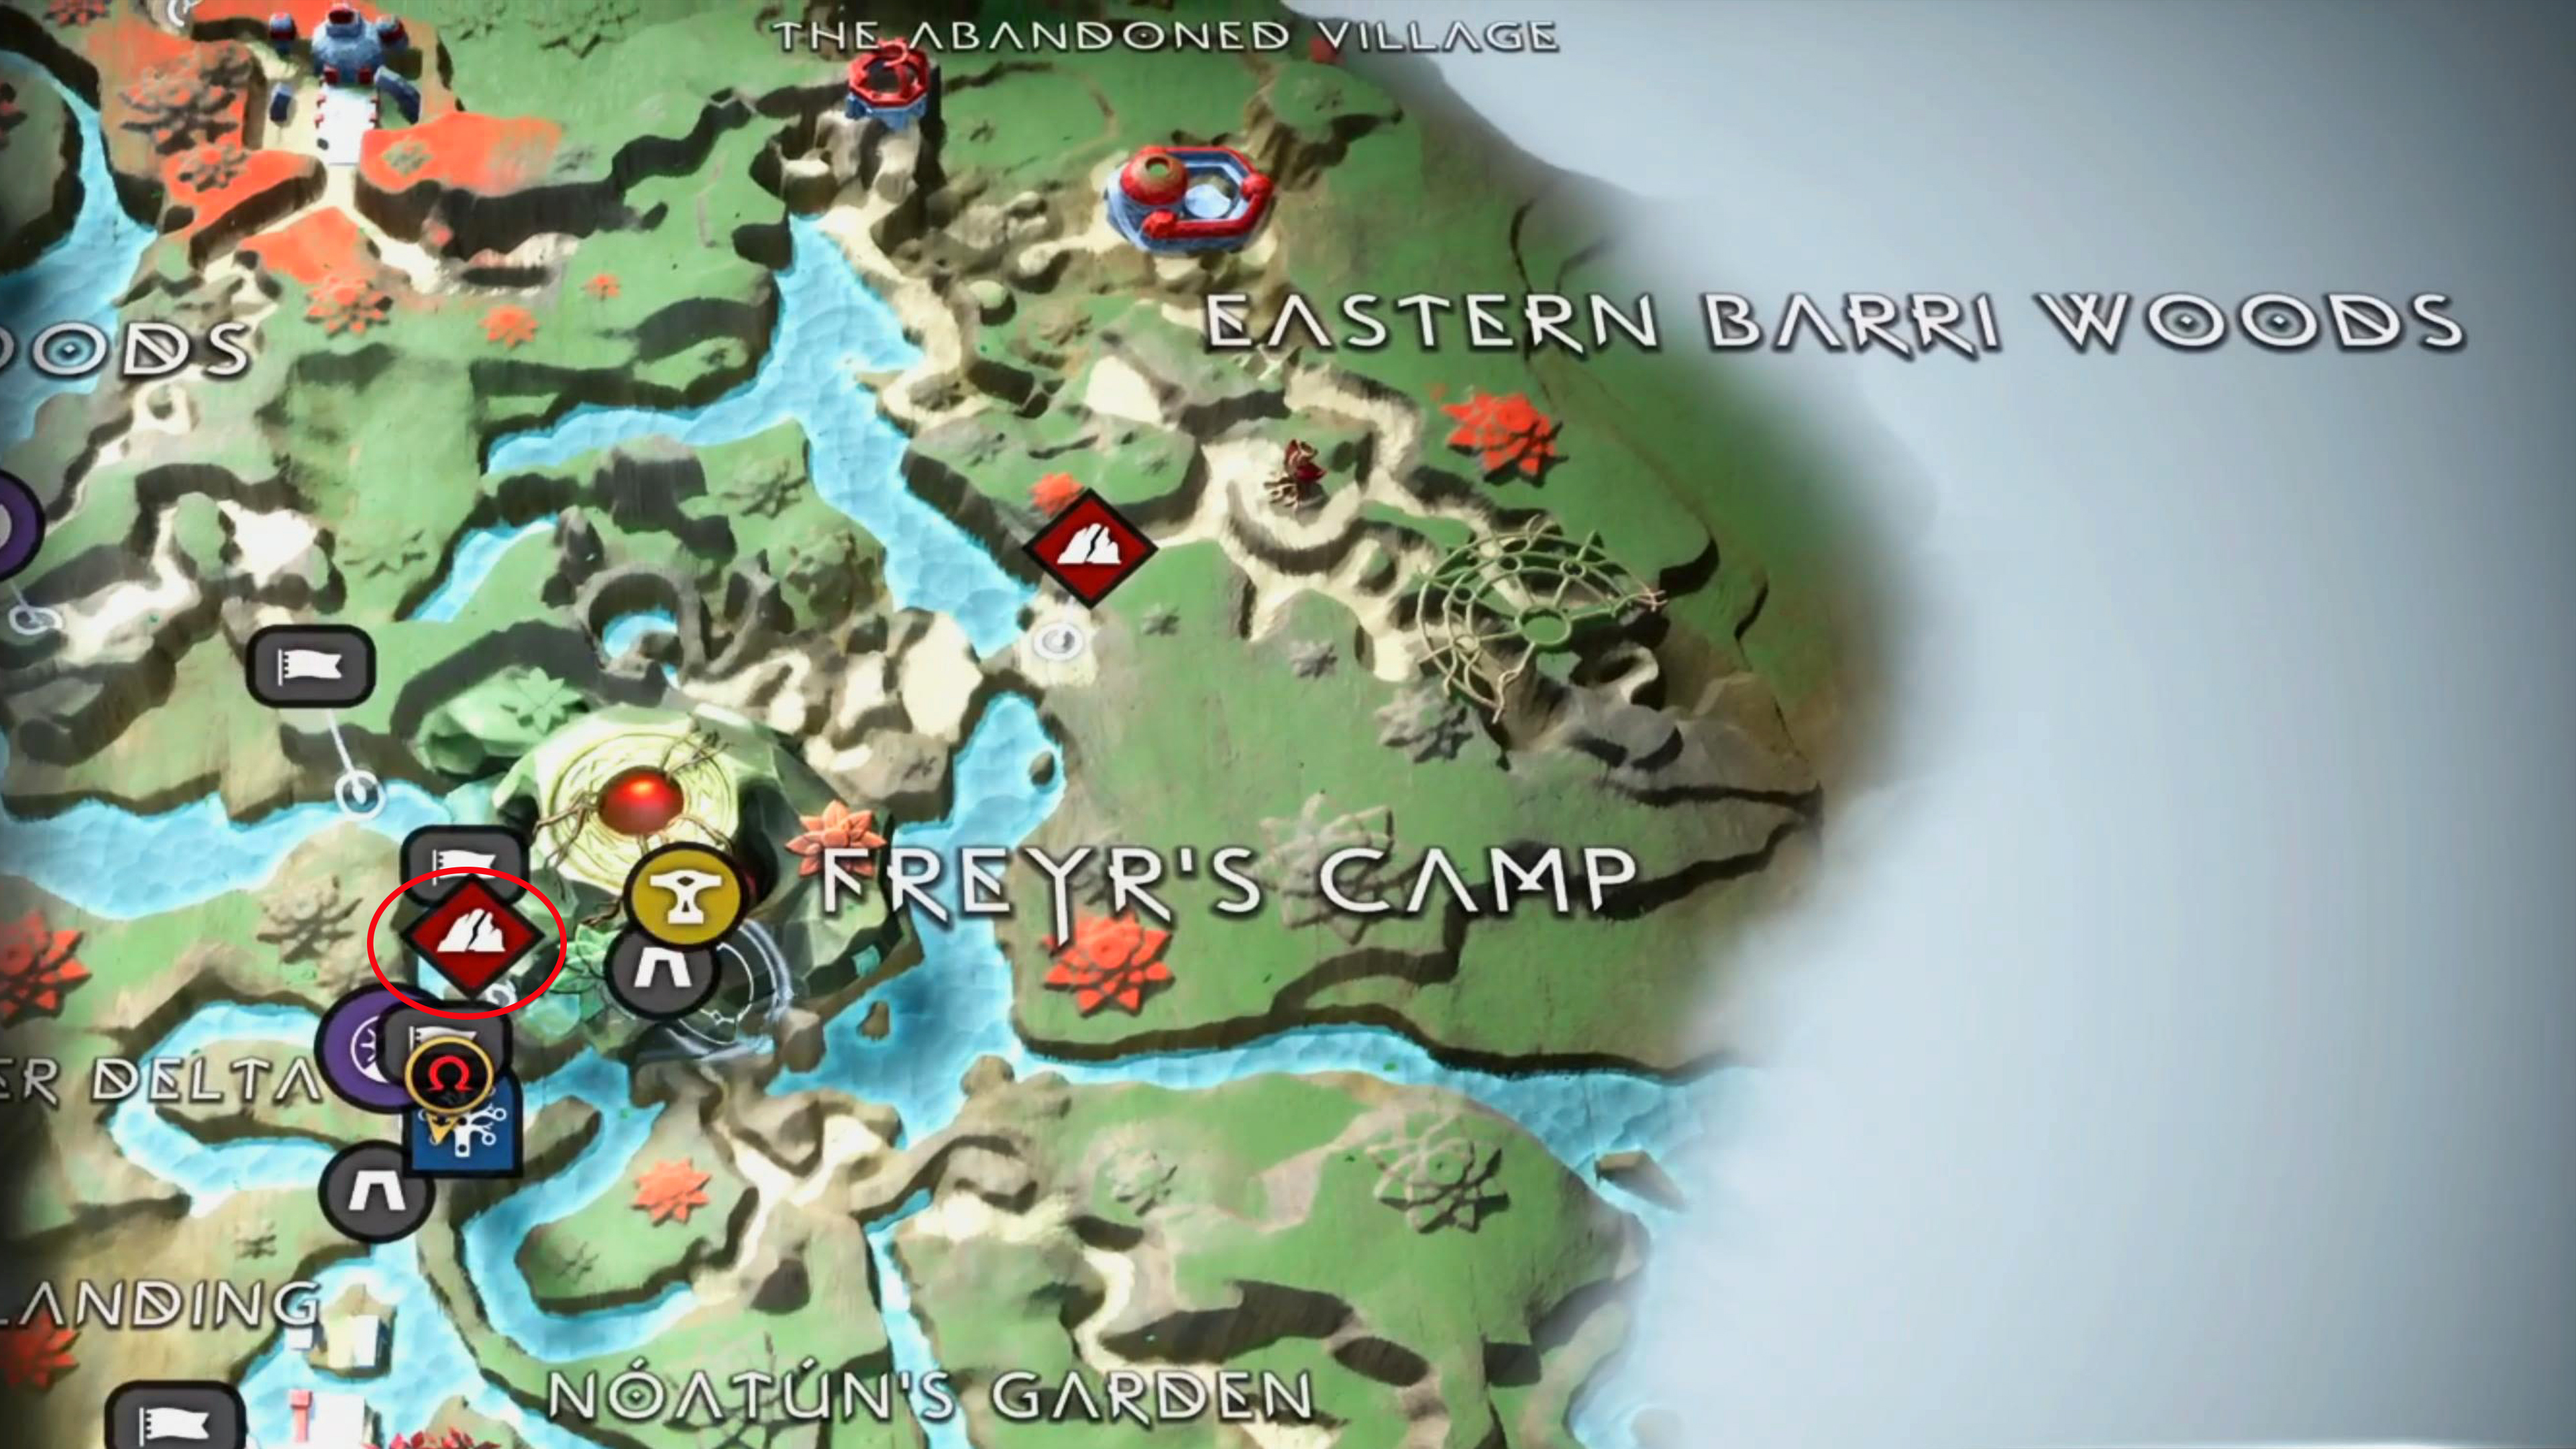 This remnant camp can be found just outside Freyr’s Camp, near the entrance you created with your spears.